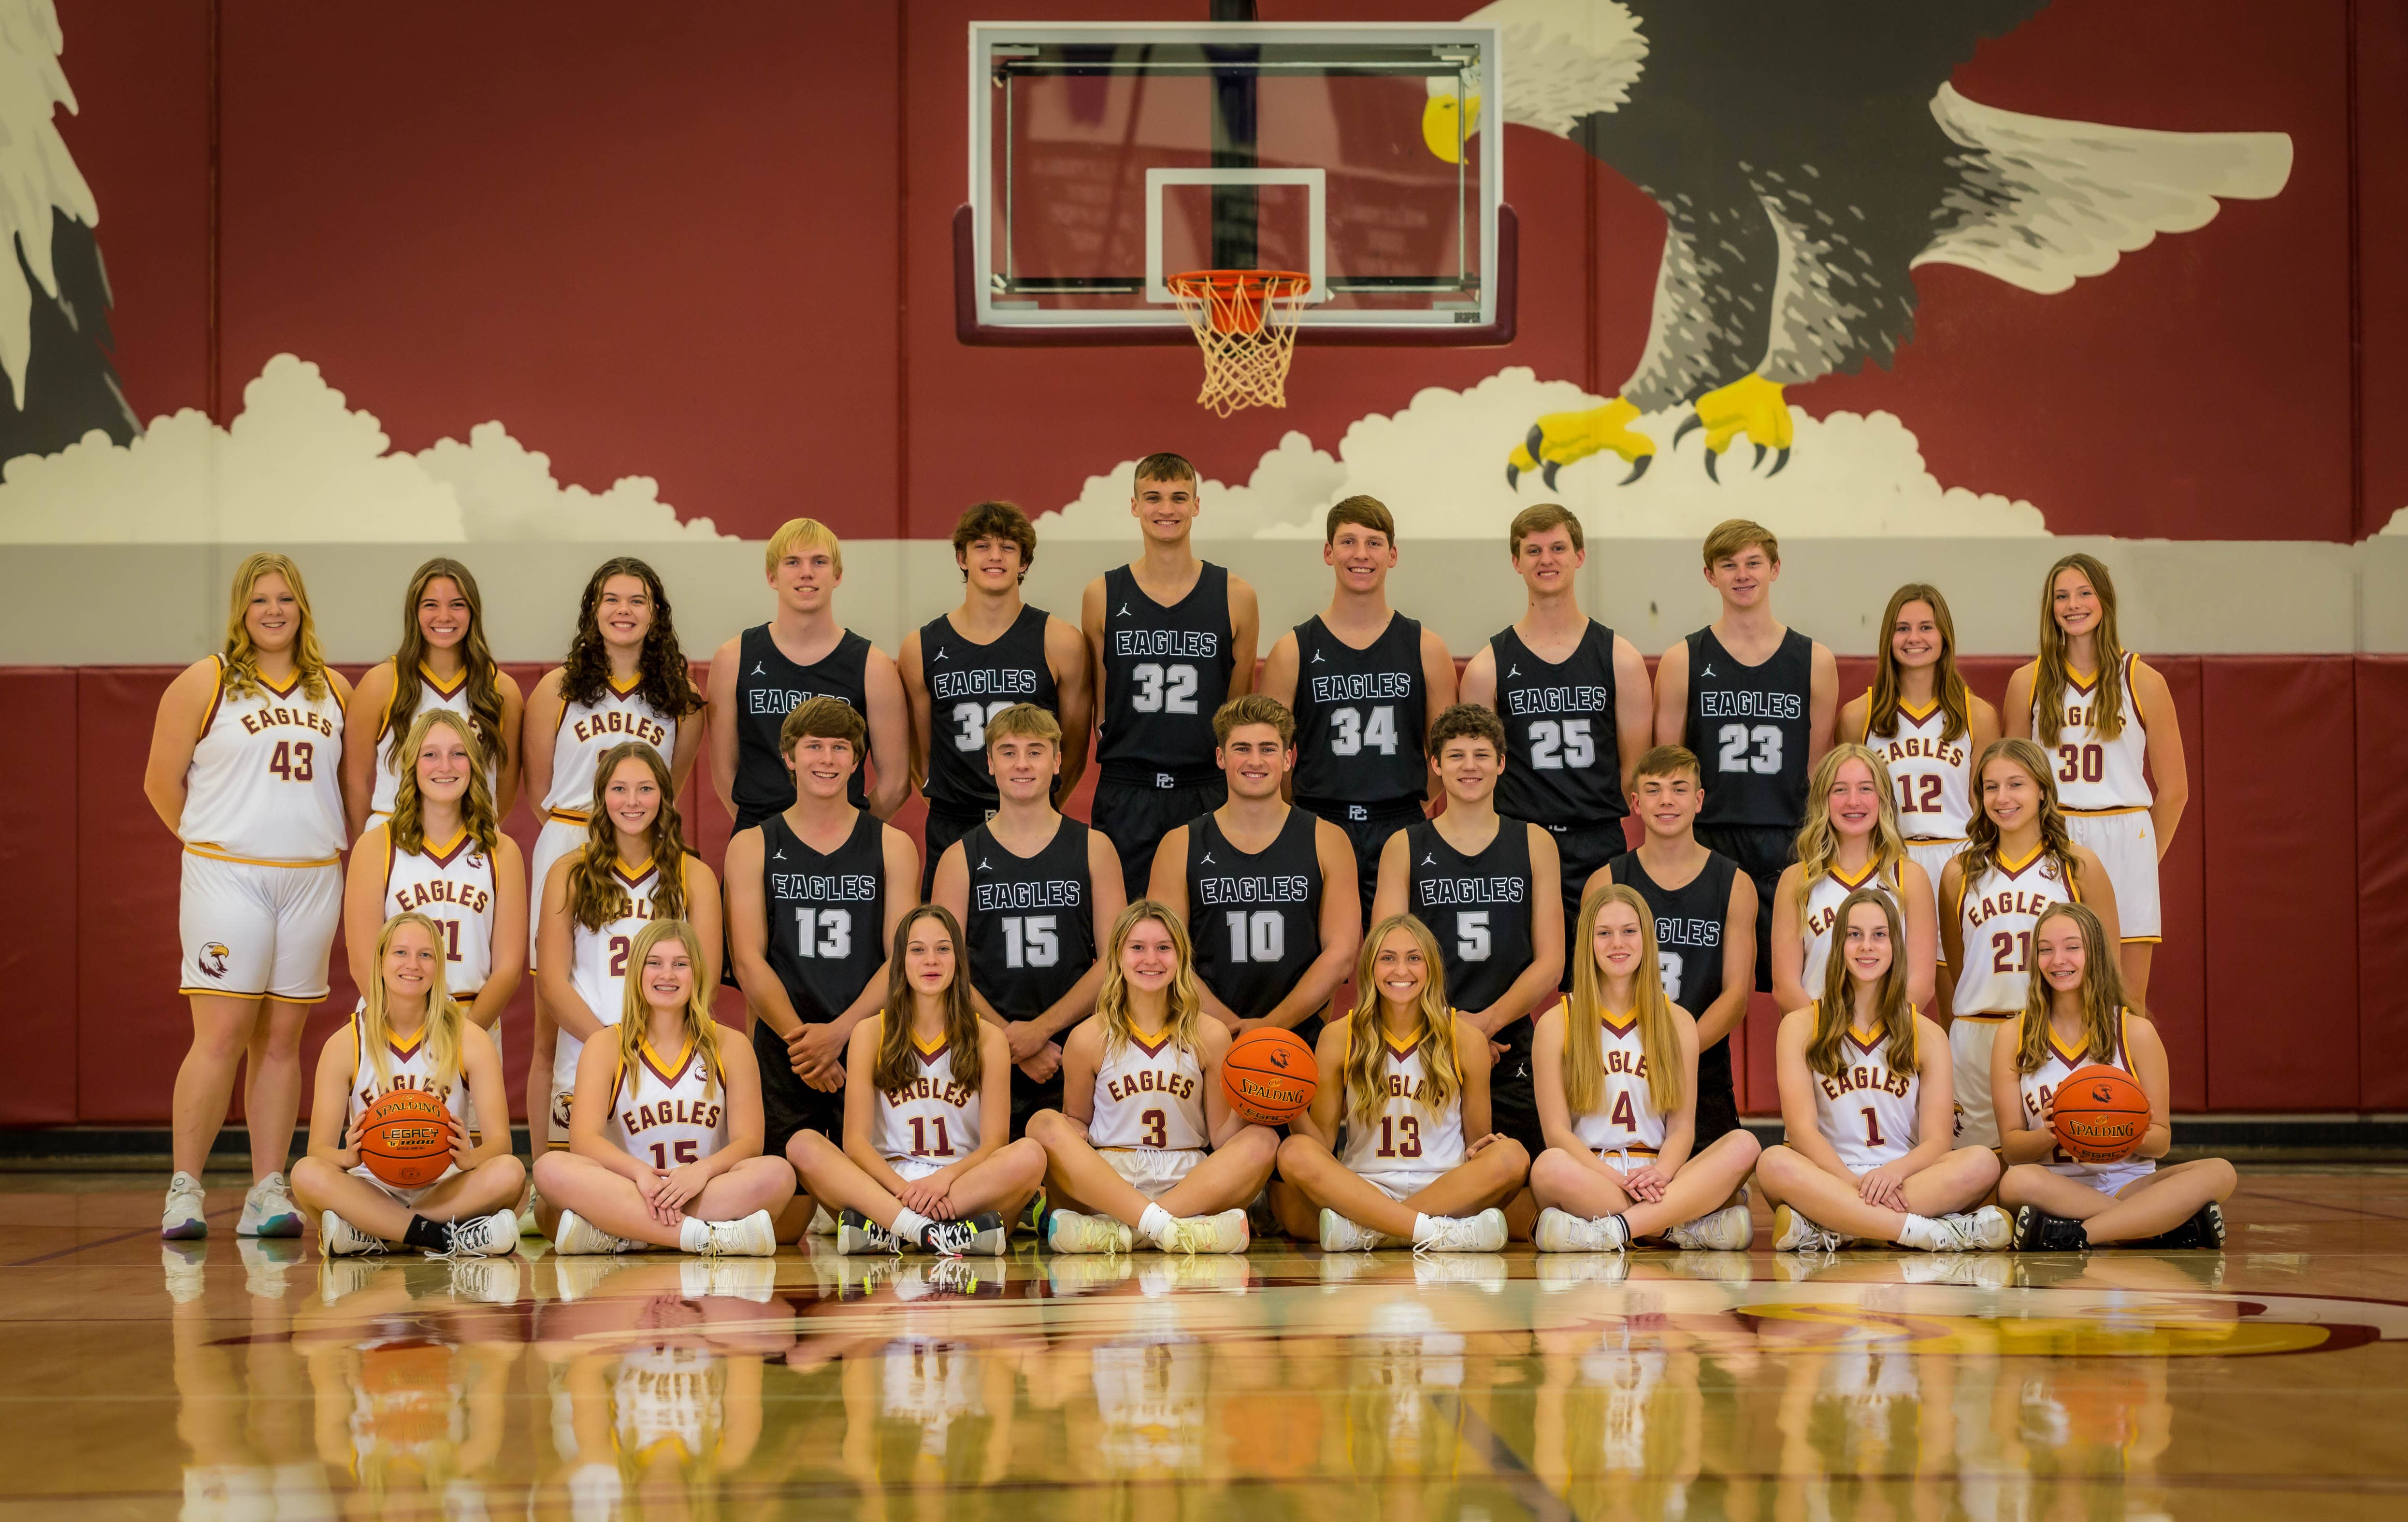 pc-combined-basketball-team-photo